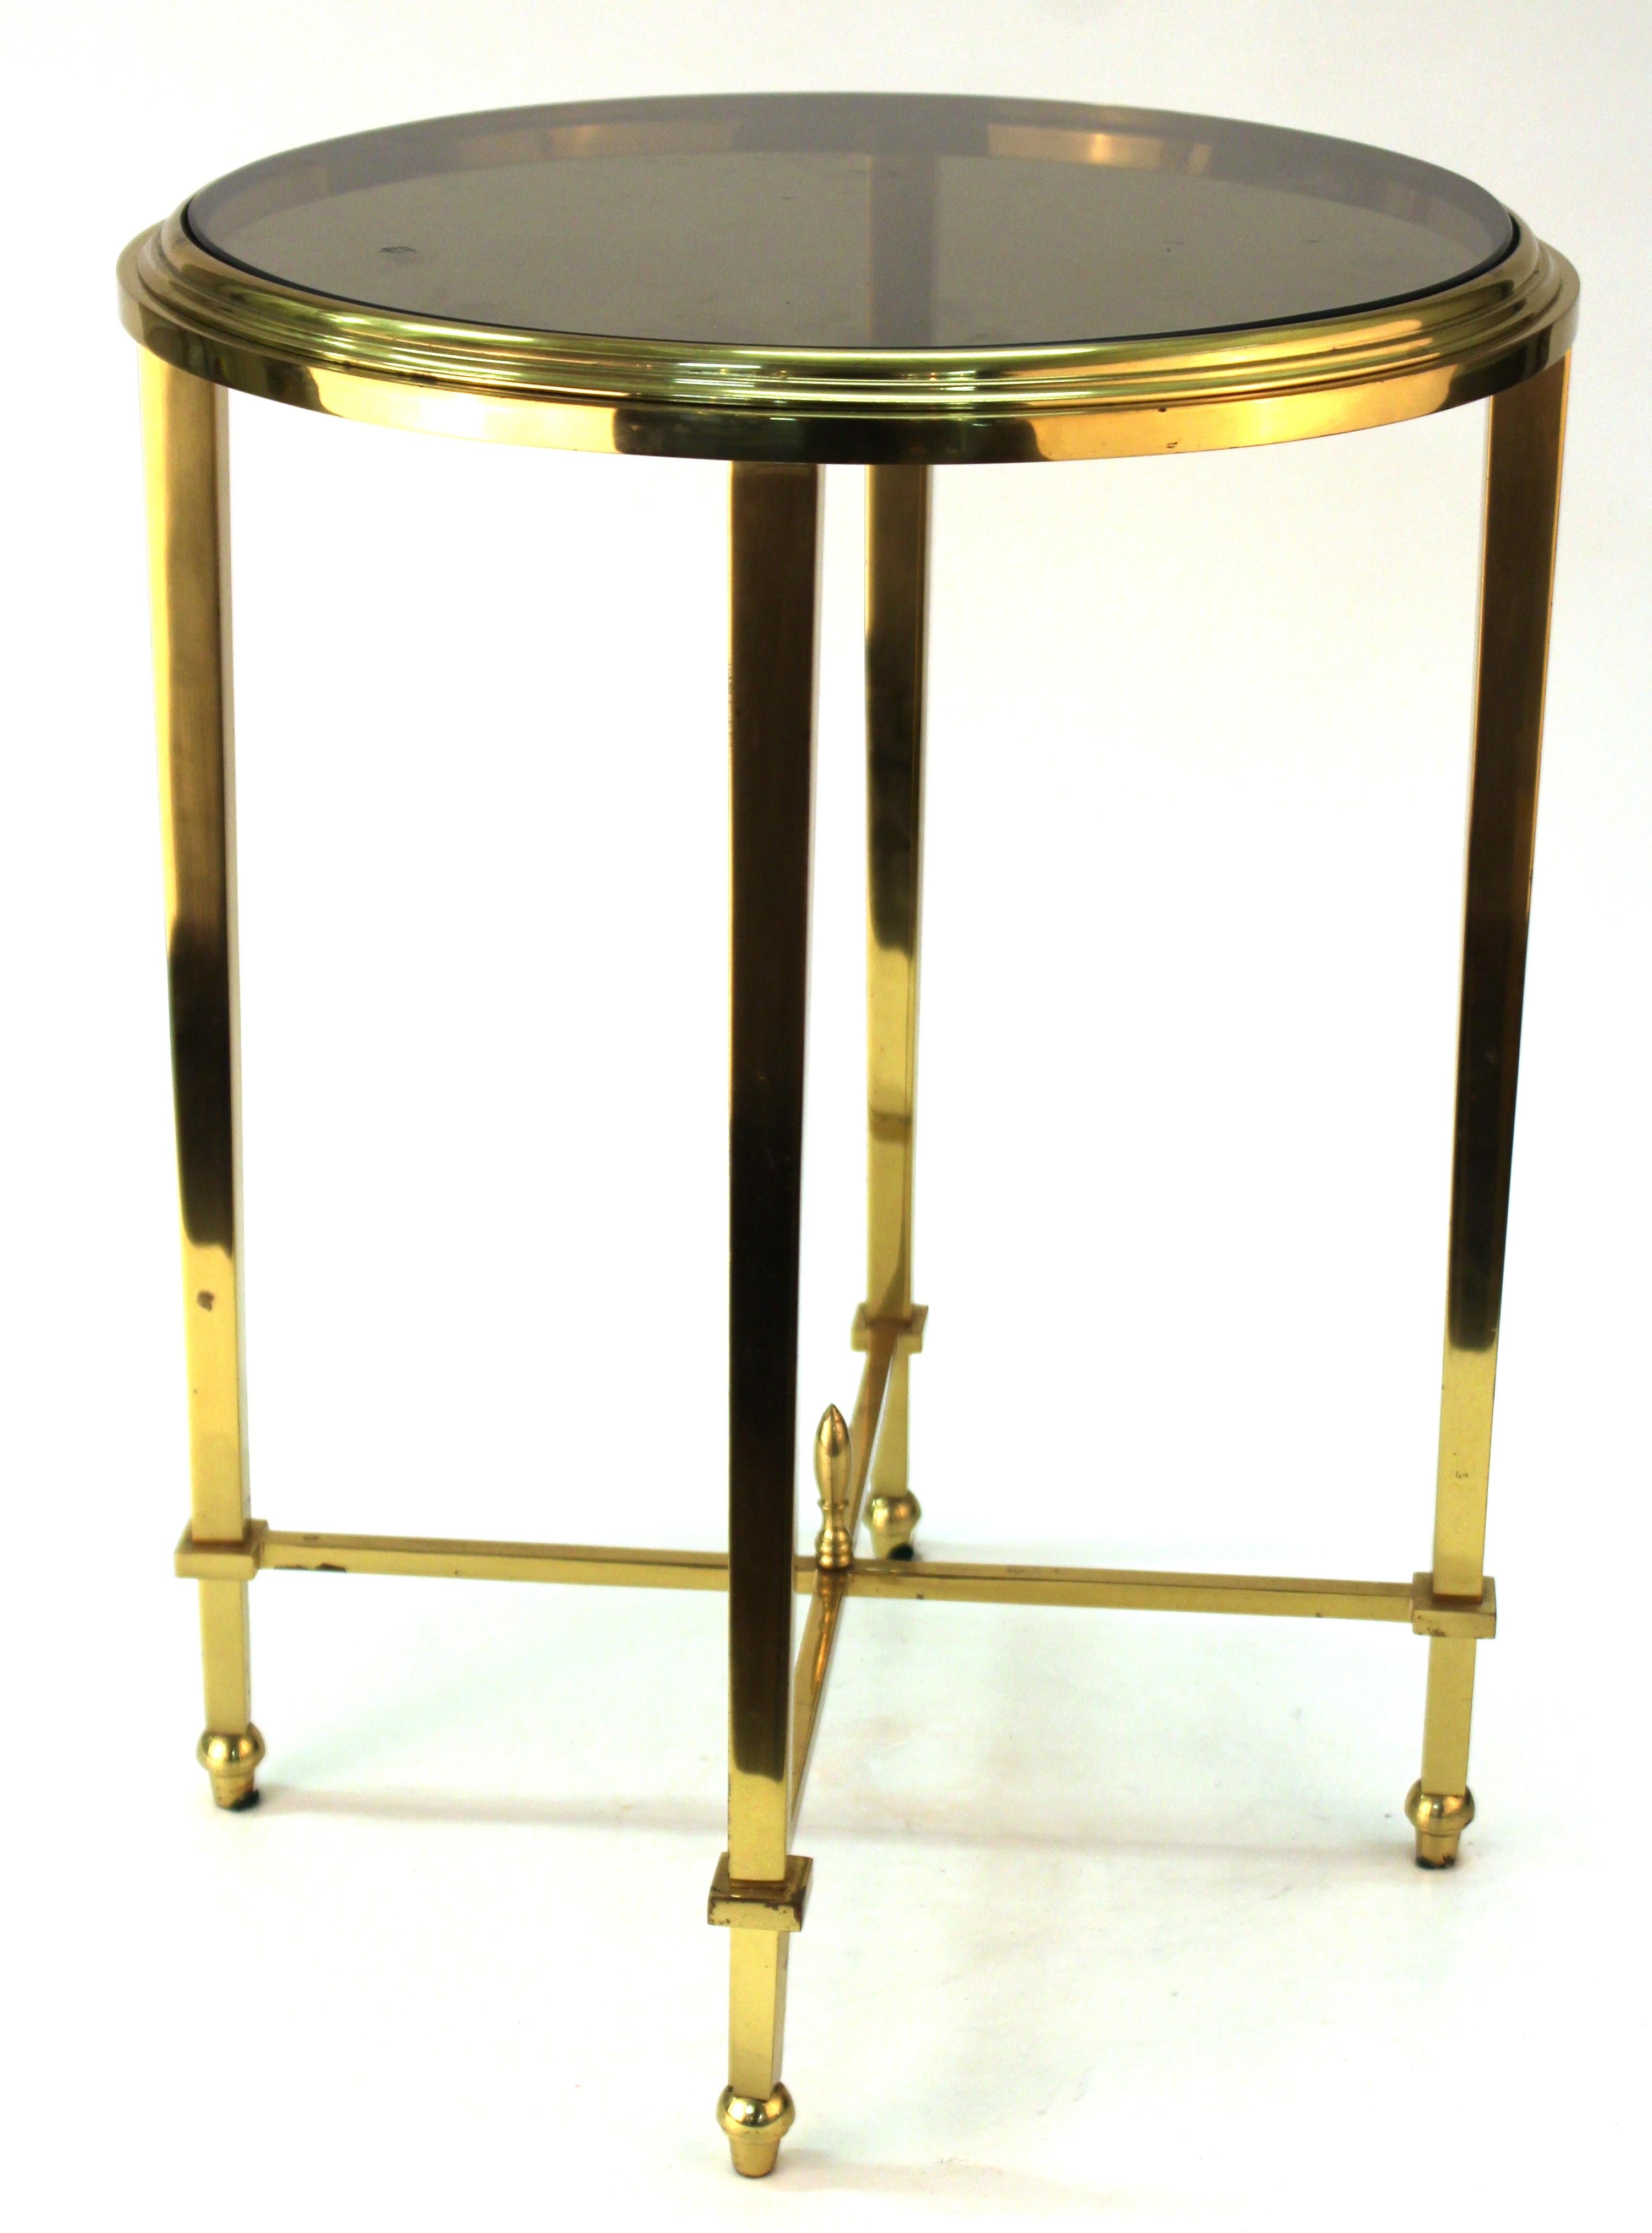 American Modern Classical Style Round Side Table with Smoked Glass Top